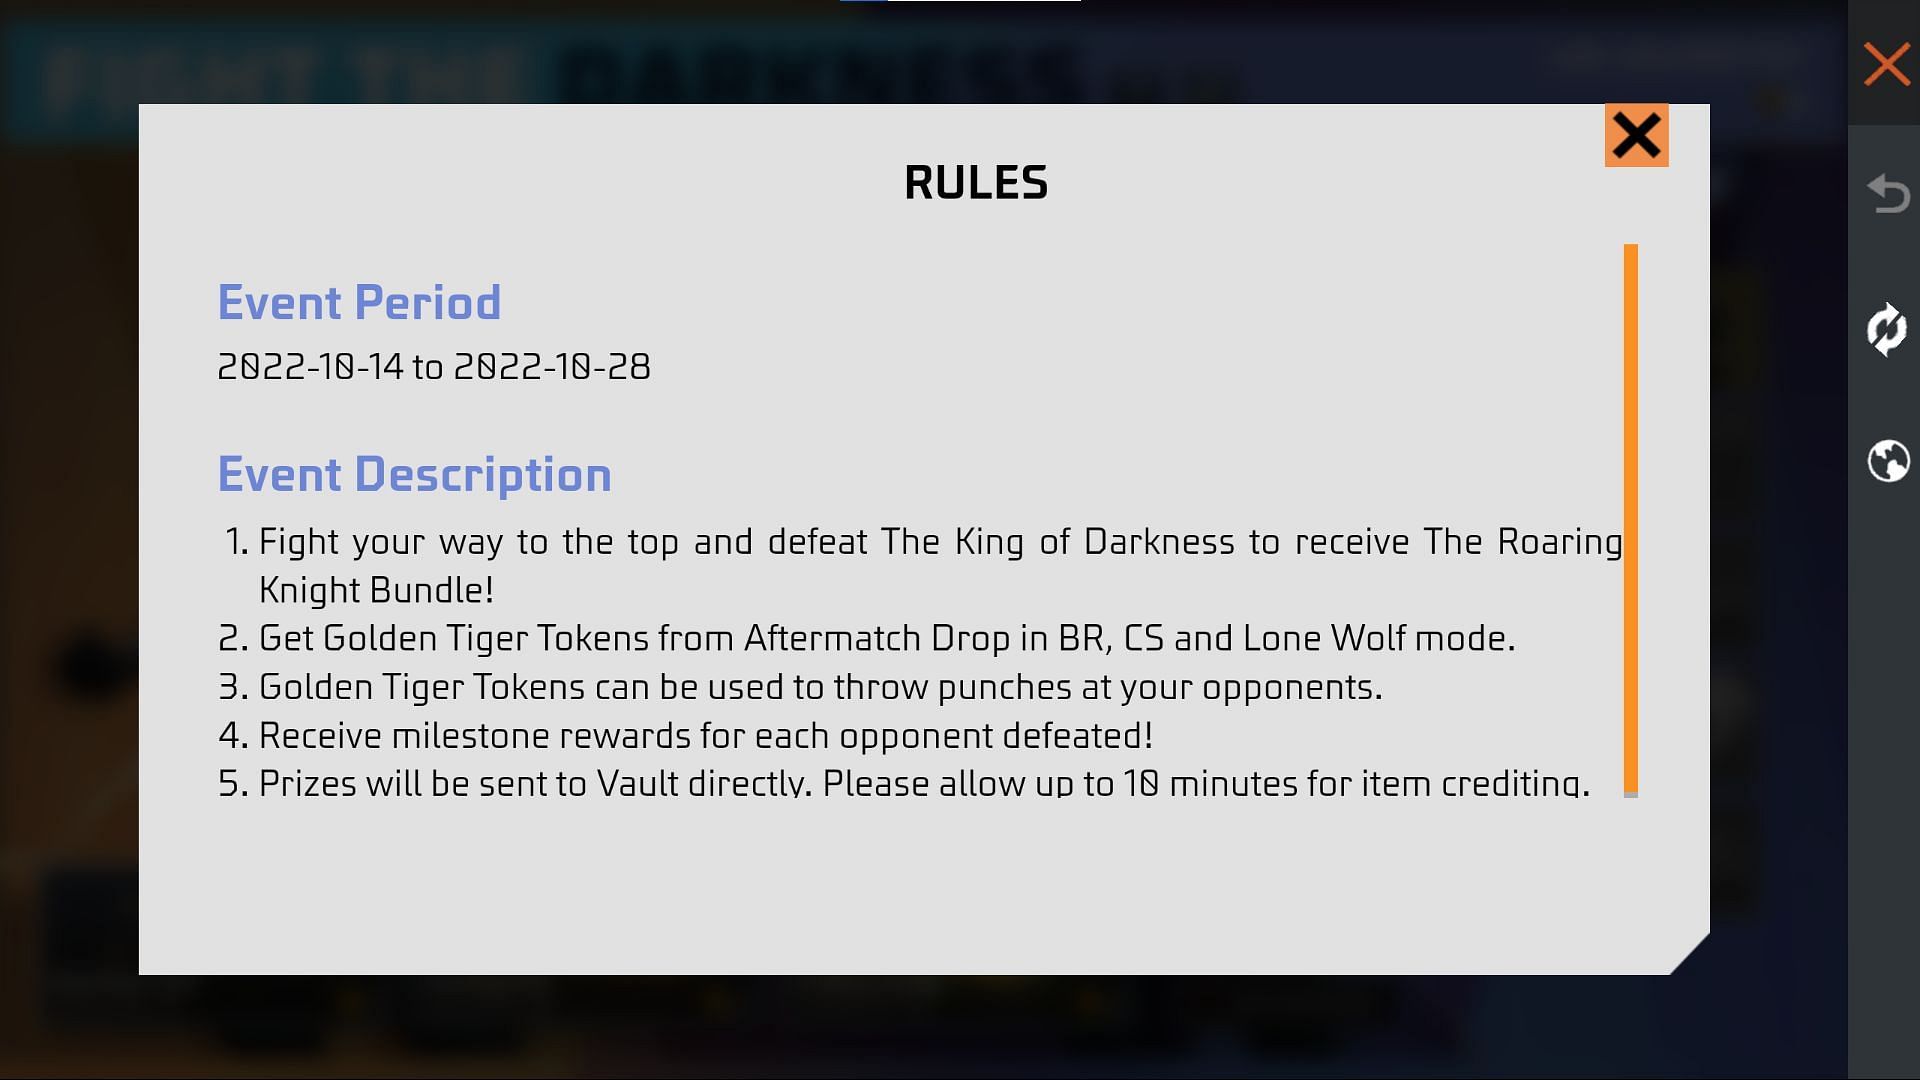 The event rules for the Fight the Darkness event (Image via Garena)